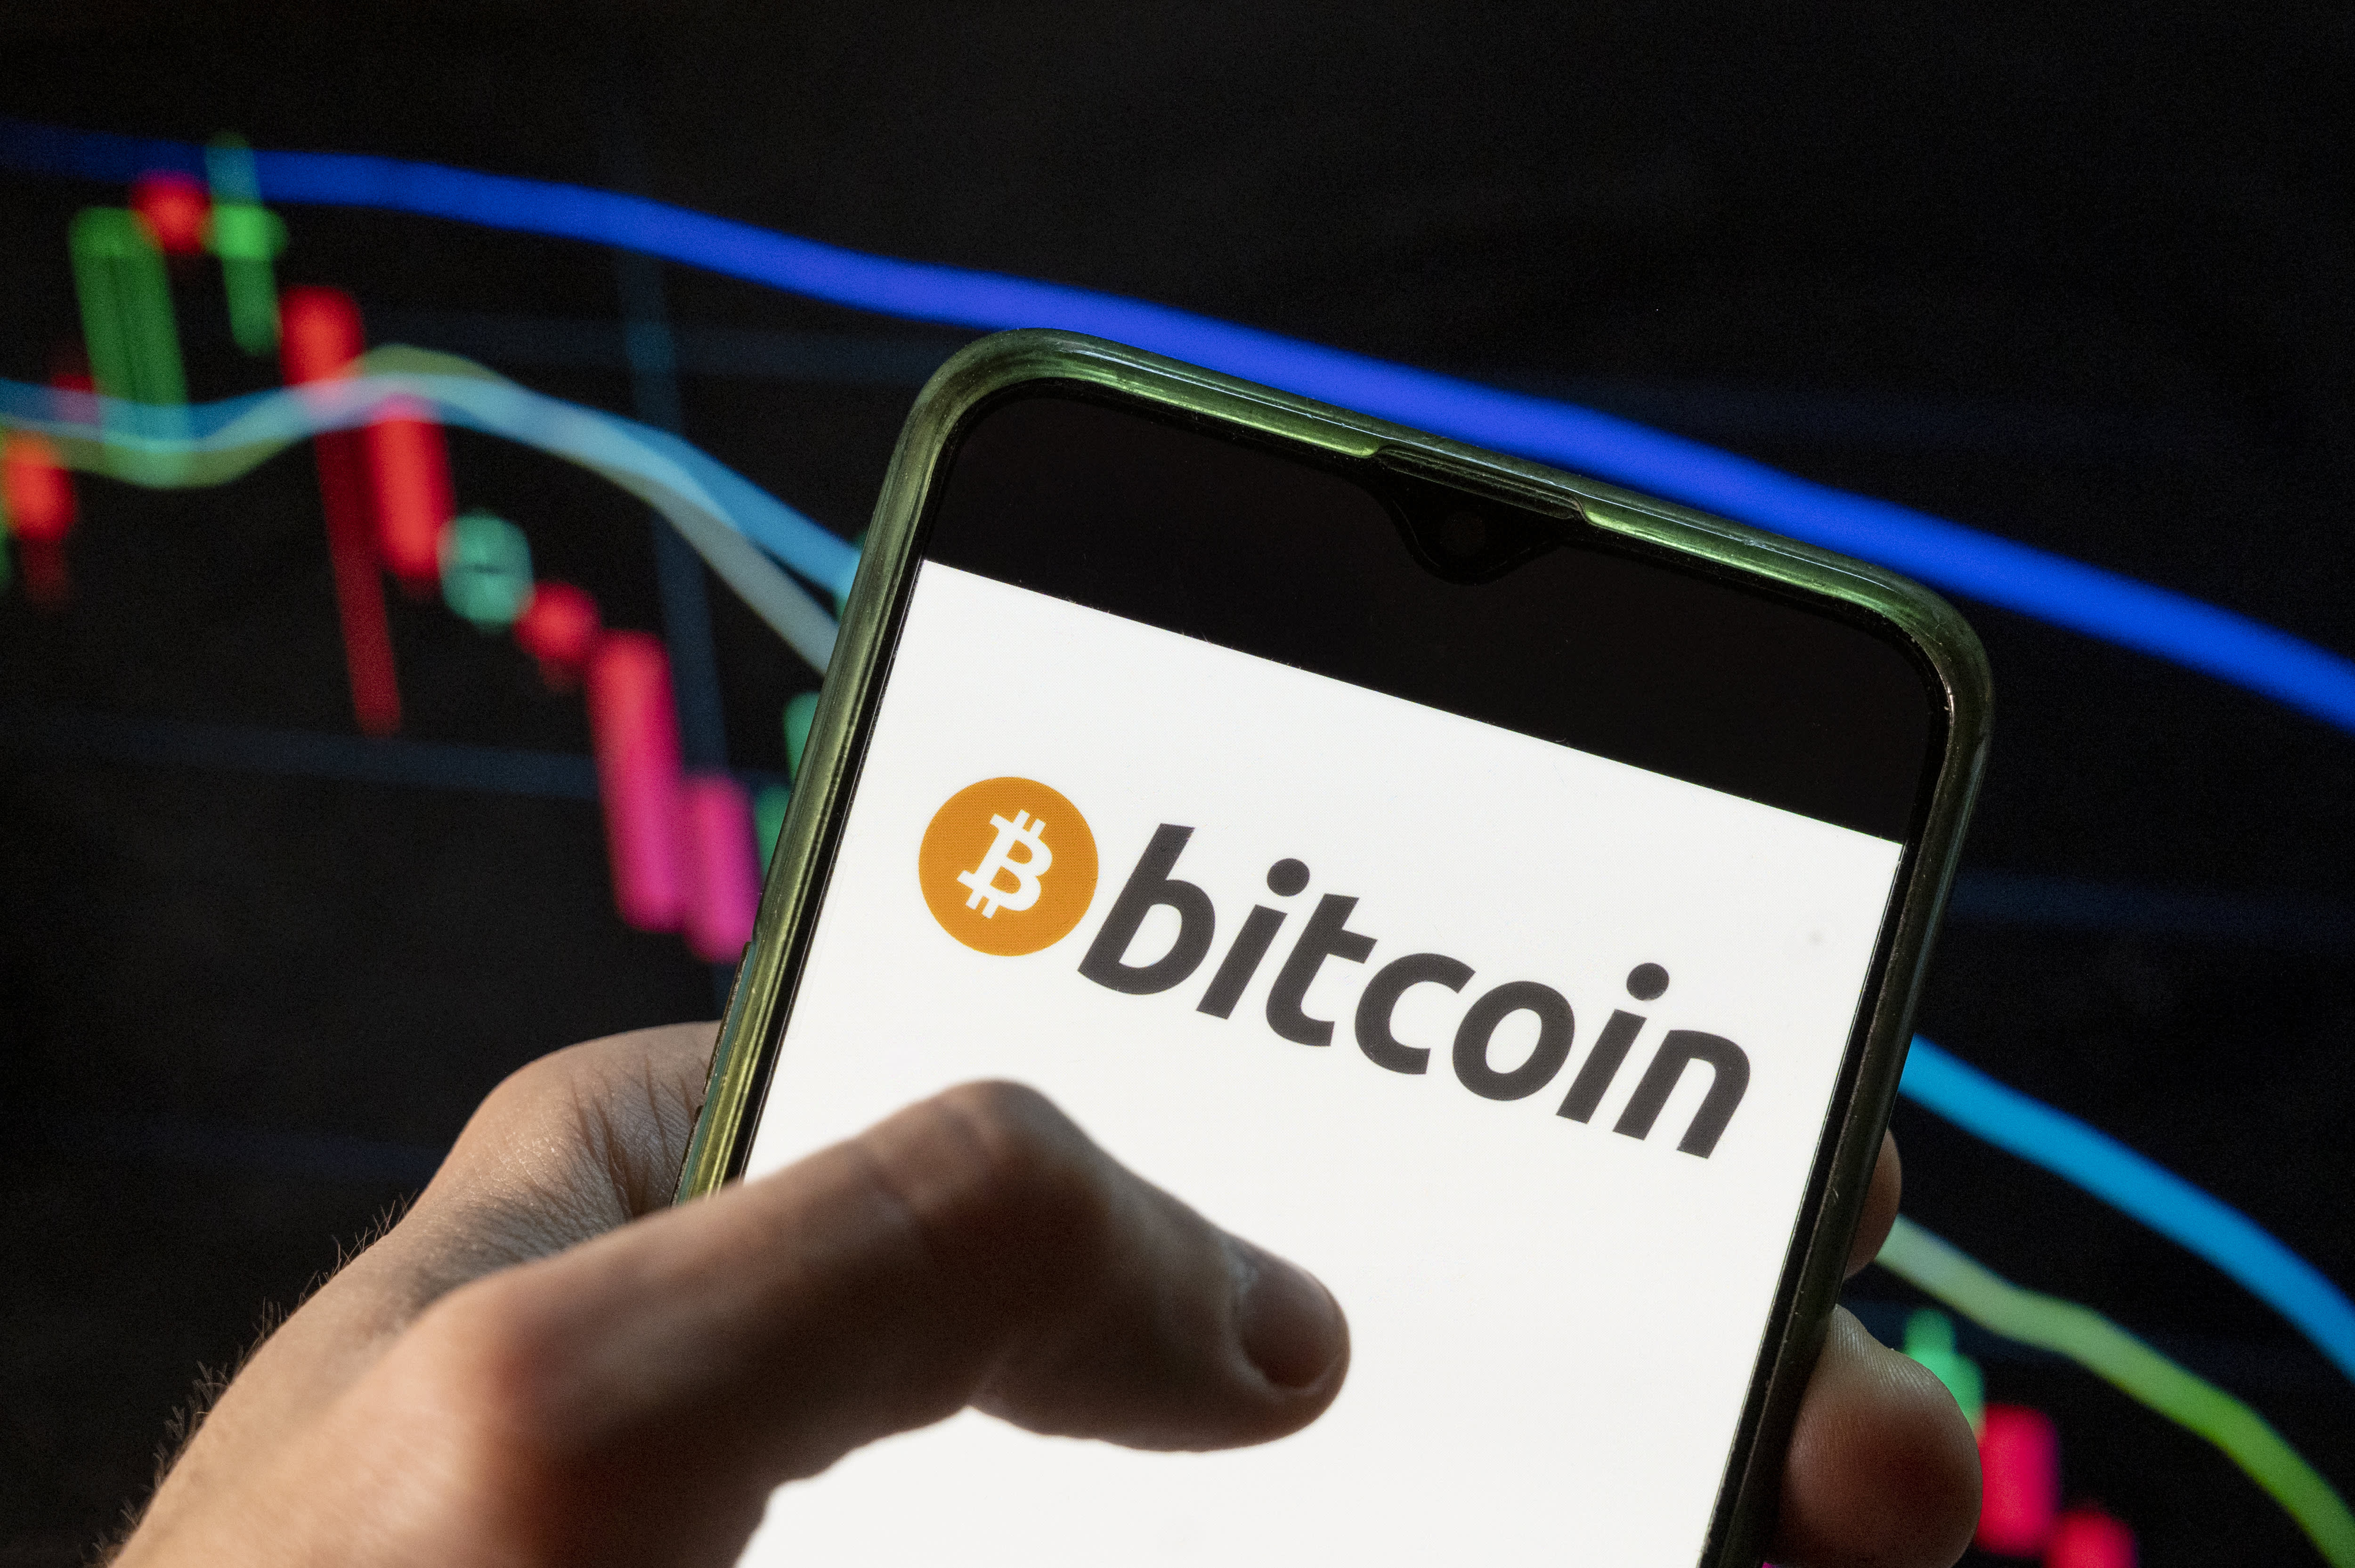 The Bitcoin (BTC) price drops to the 3-month lowest price